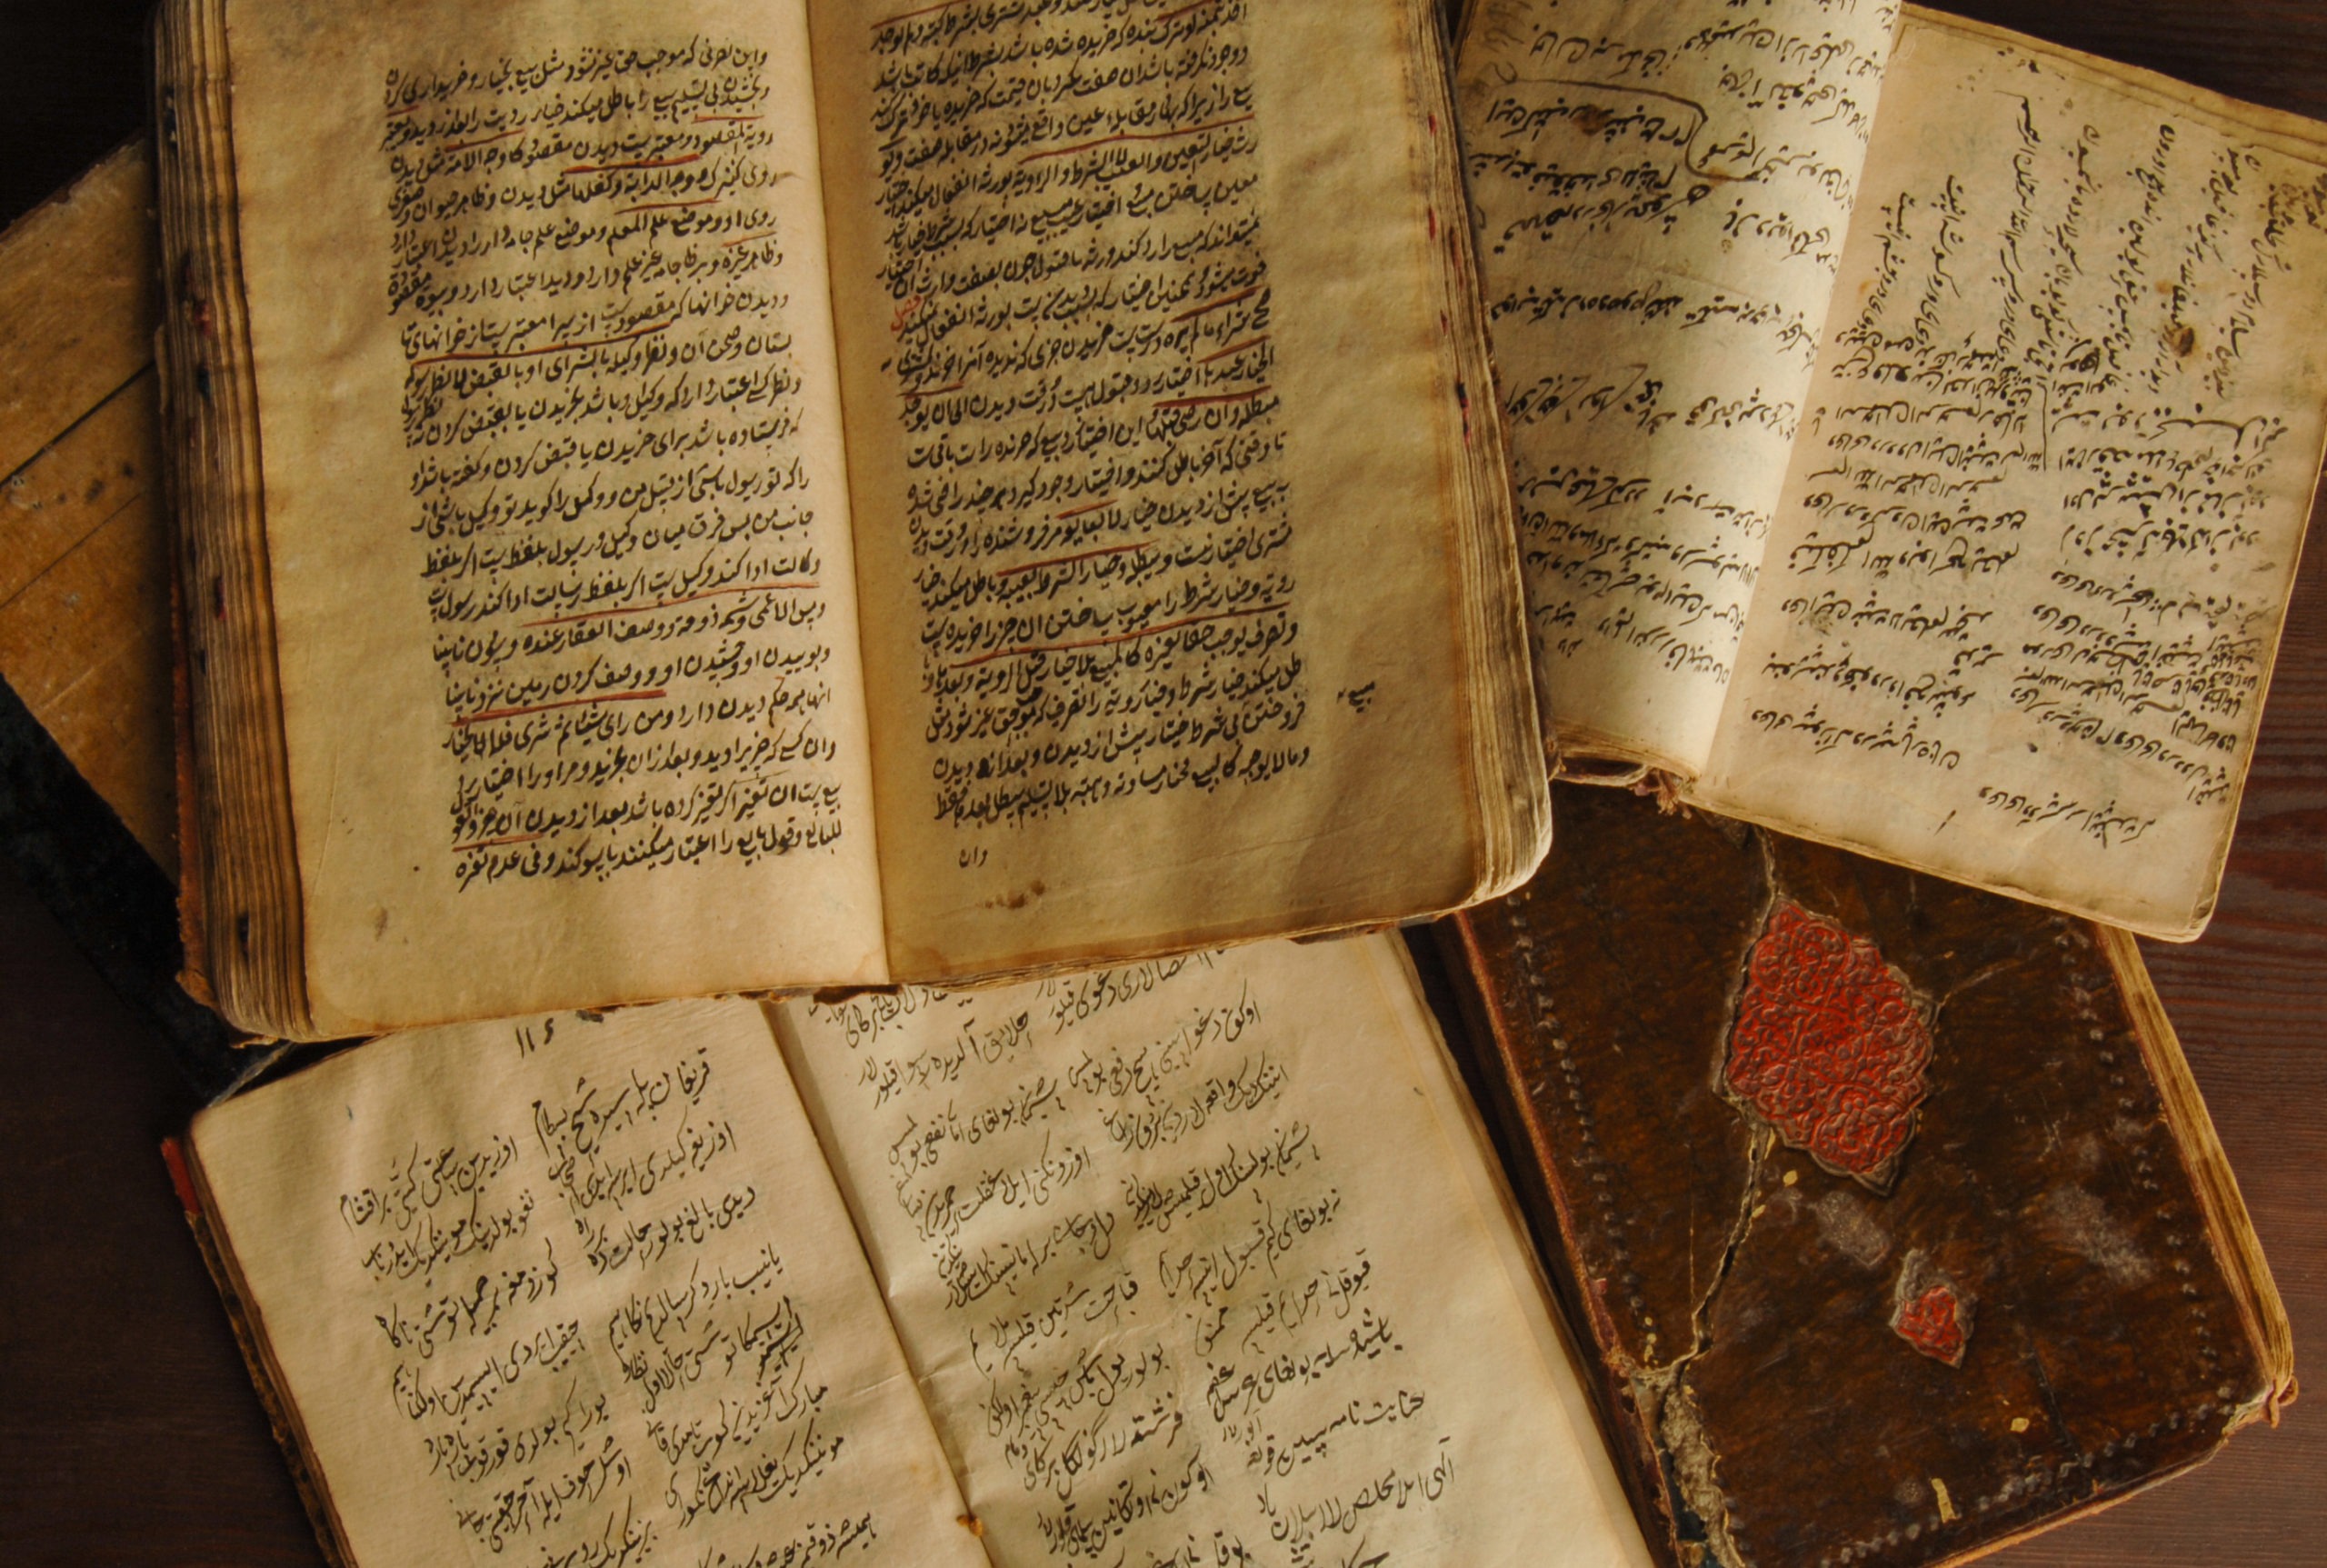 Ancient Arabic books opened on the table.